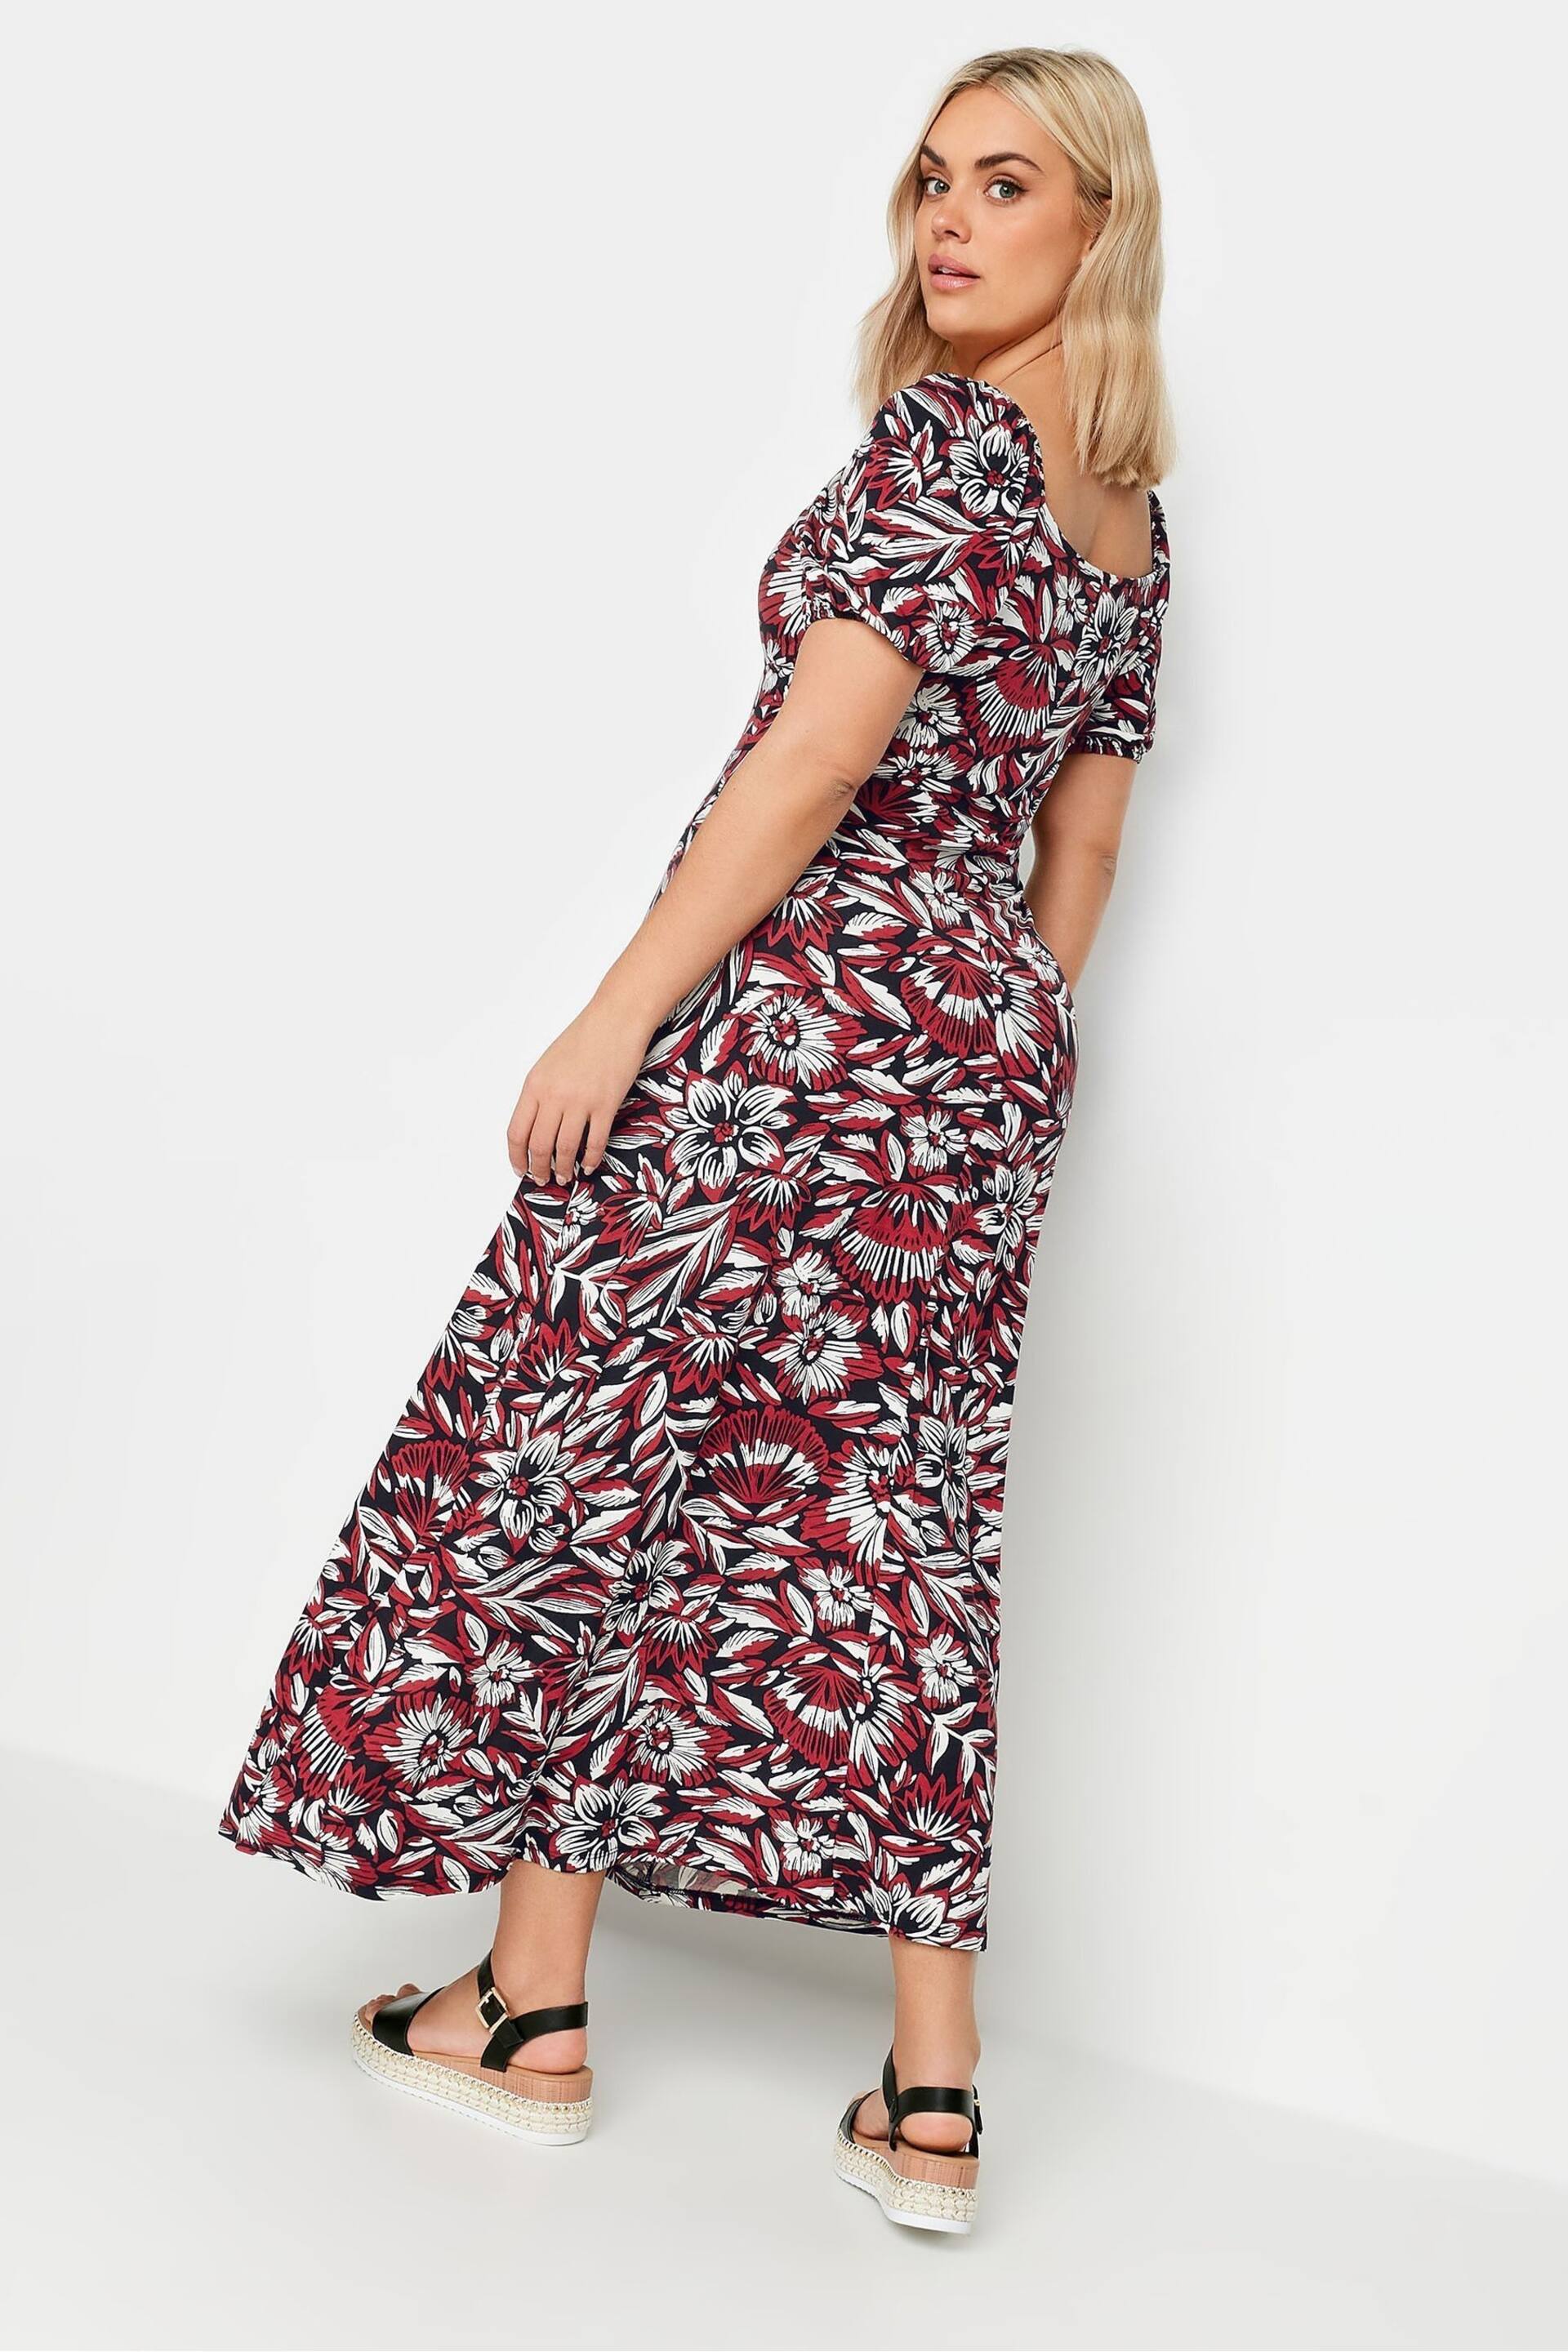 Yours Curve Red Floral Wrap Maxi Dress - Image 3 of 5